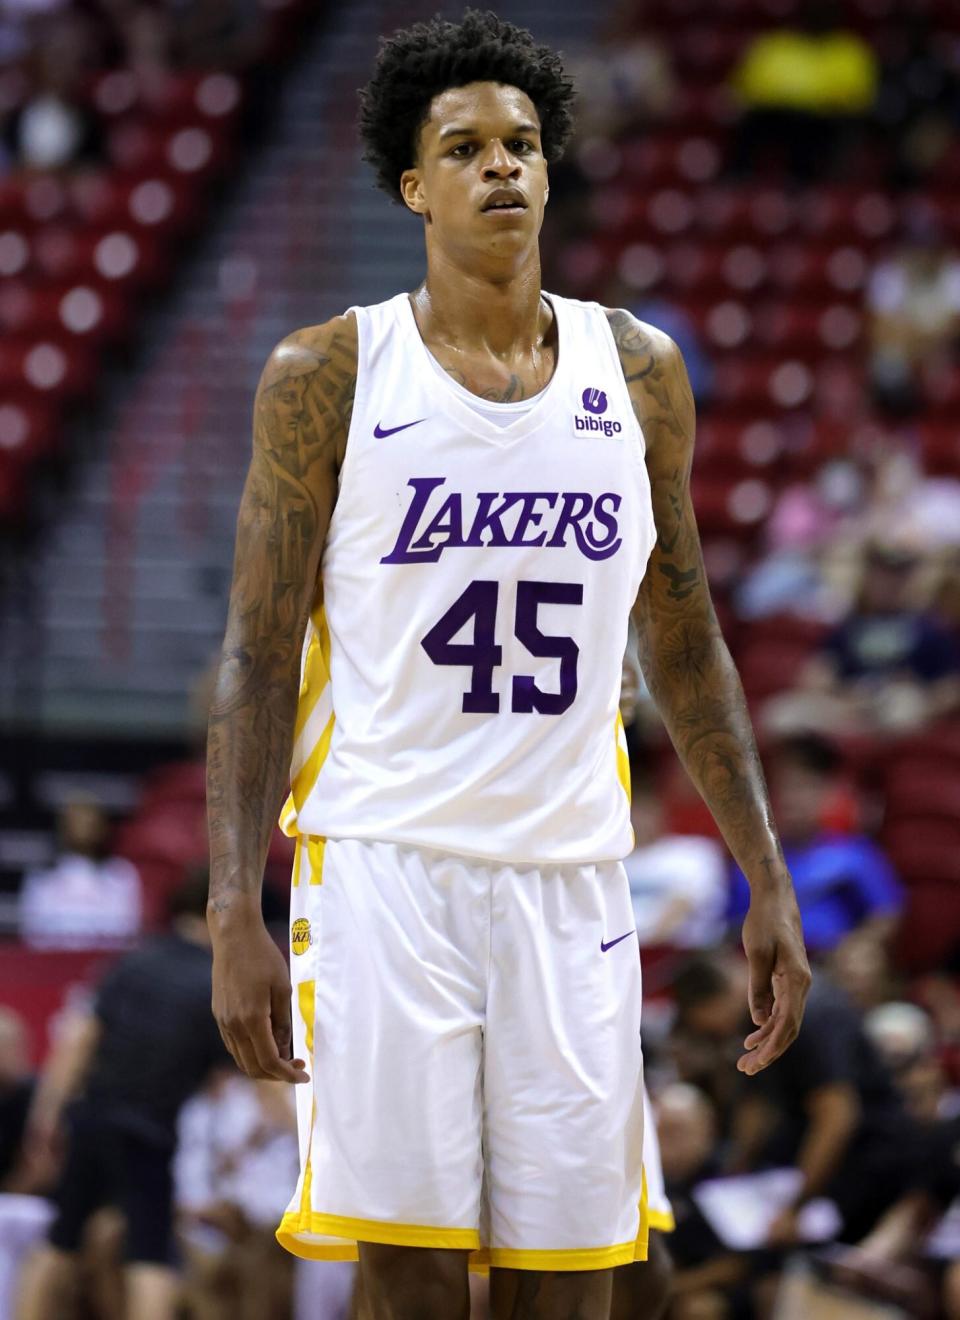 Shareef O'Neal #45 of the Los Angeles Lakers stands on the court during a break in a game against the Phoenix Suns during the 2022 NBA Summer League